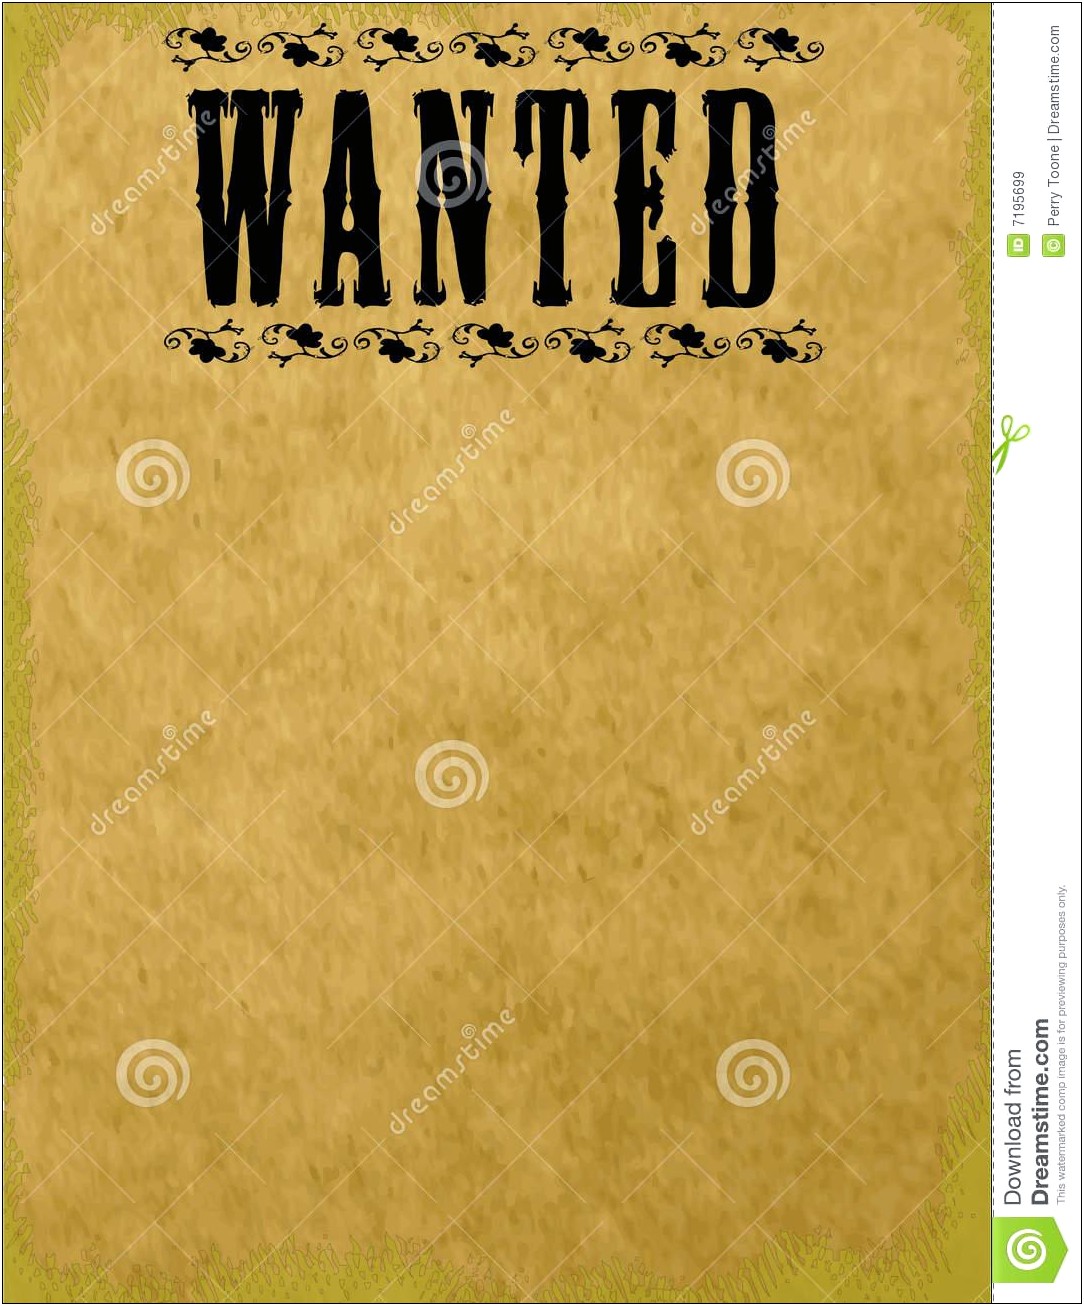 Free Wanted Poster Template For Kids